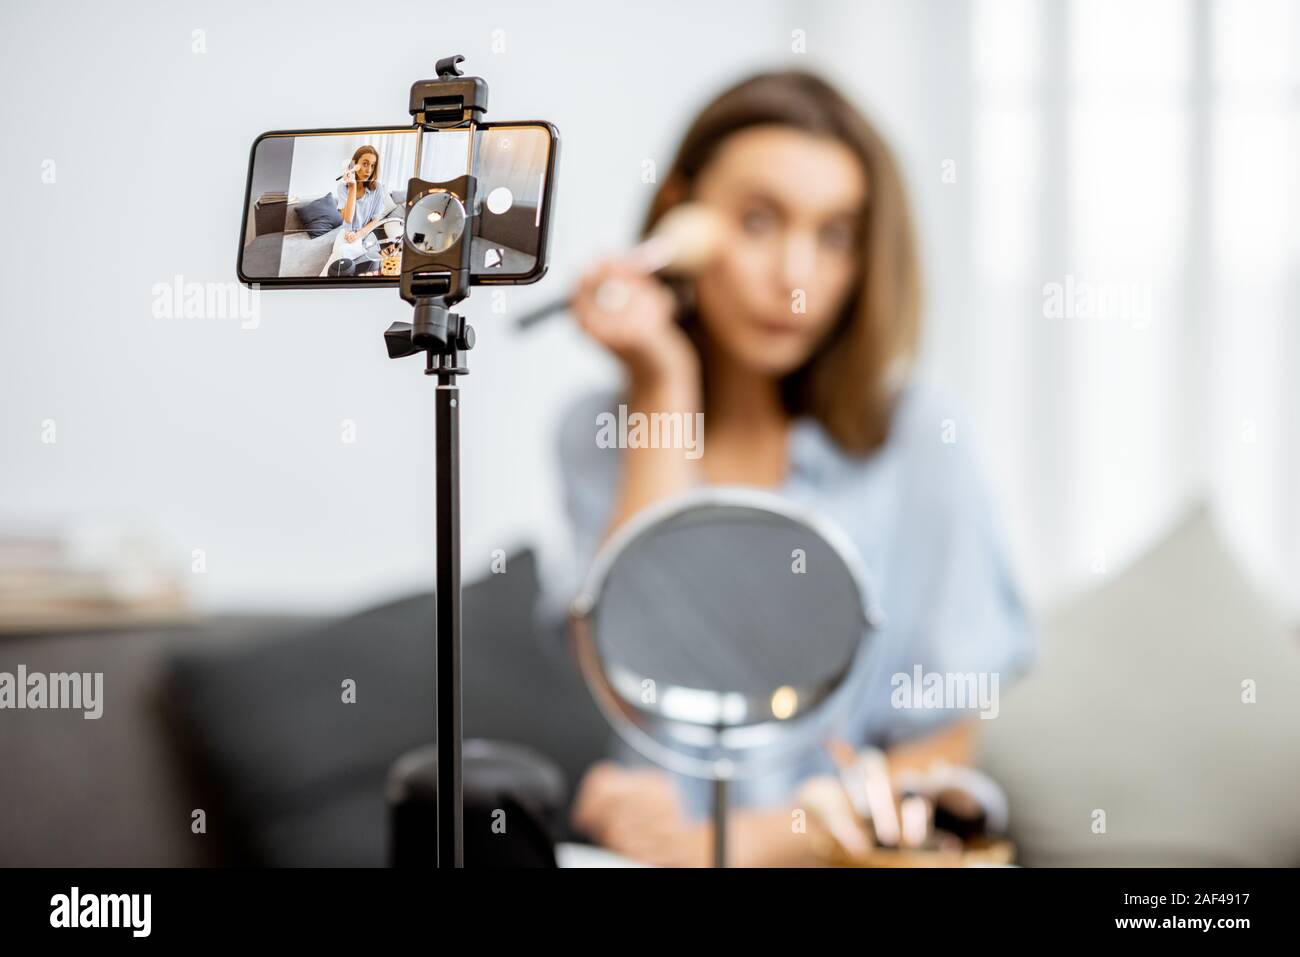 Young woman recording on a smart phone her vlog about cosmetics, showing and demonstrating makeup. Influencer marketing in social media concept Stock Photo